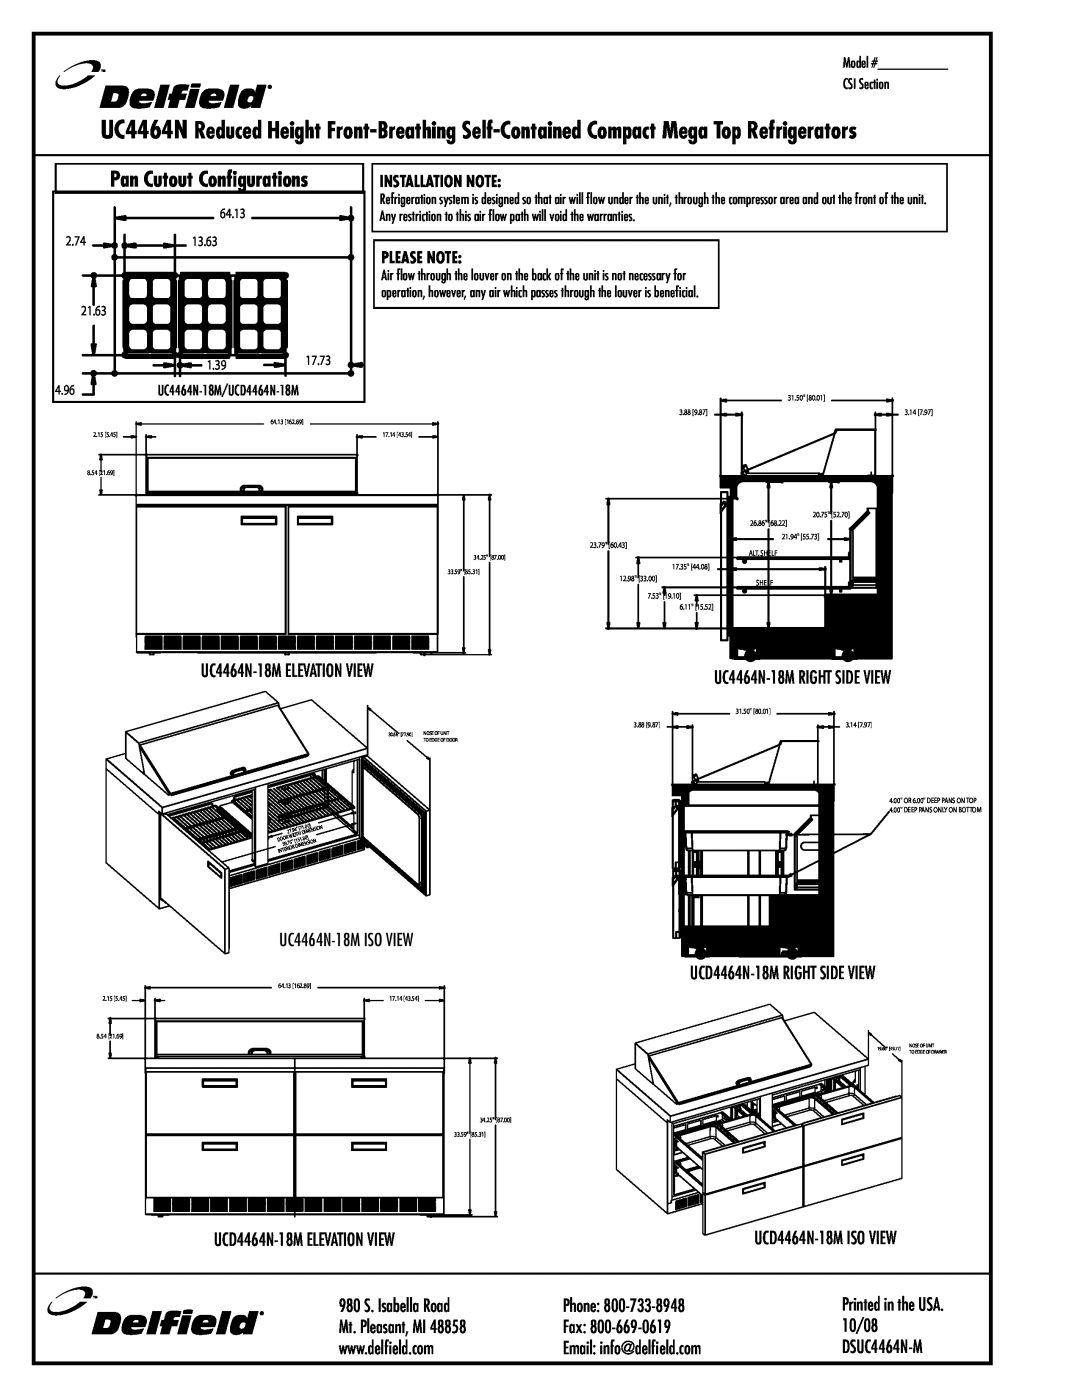 Delfield UC4464N-24M, UCD4464N-12M Pan Cutout Configurations, Installation Note, Please Note, 19.60, To Edge Of Drawer 